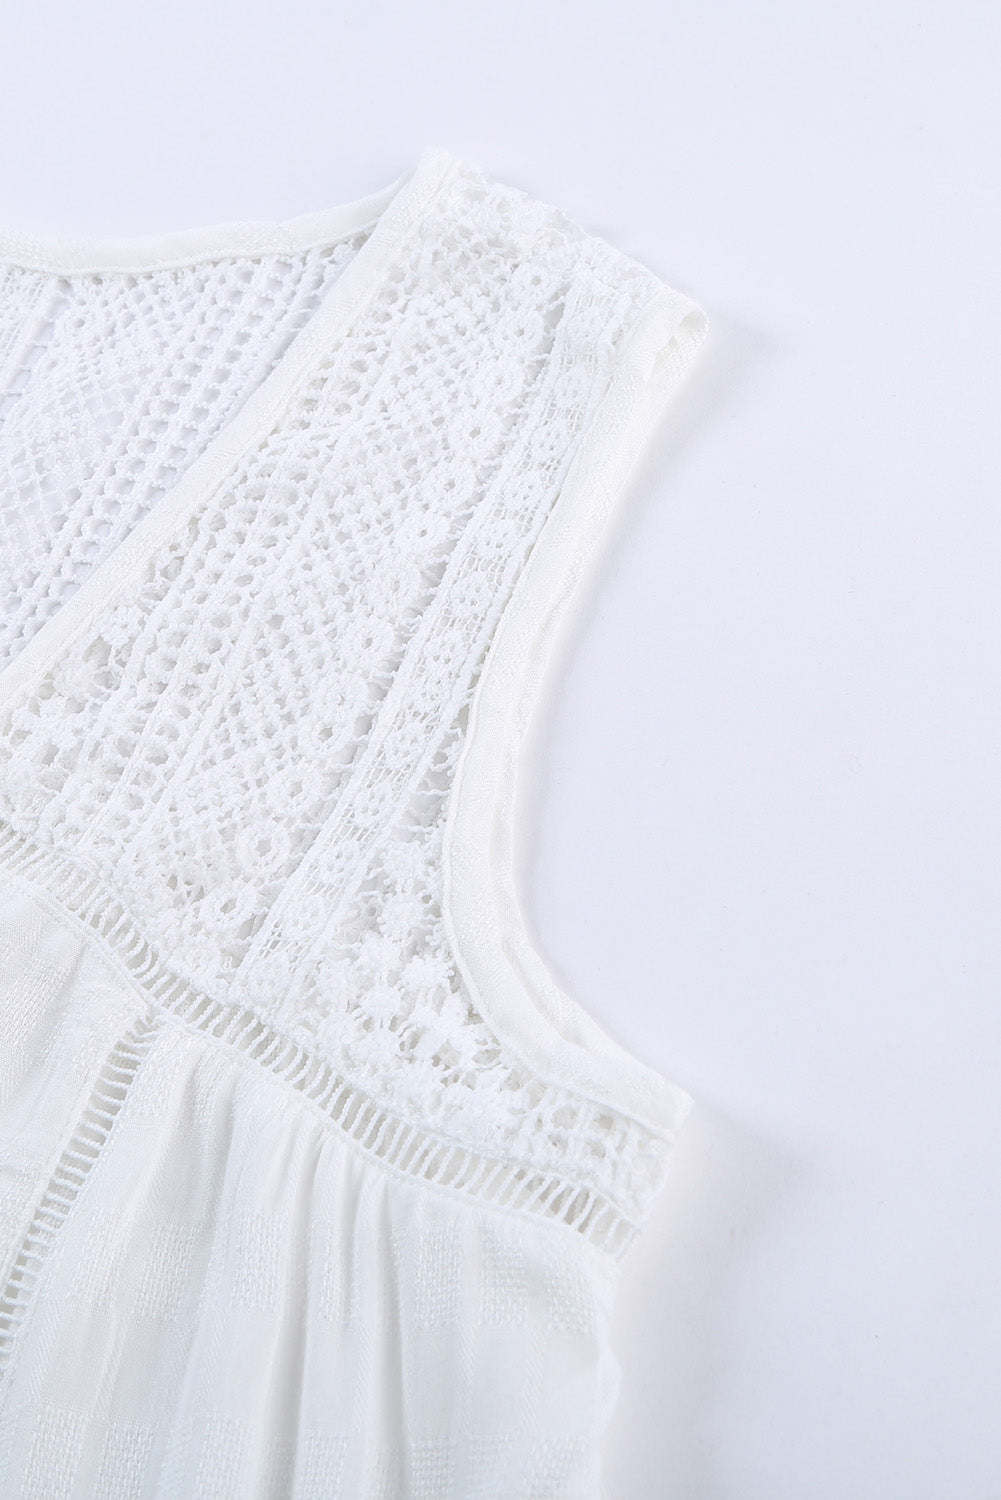 Chic White Lace Tie Front Button Summer Tank Top